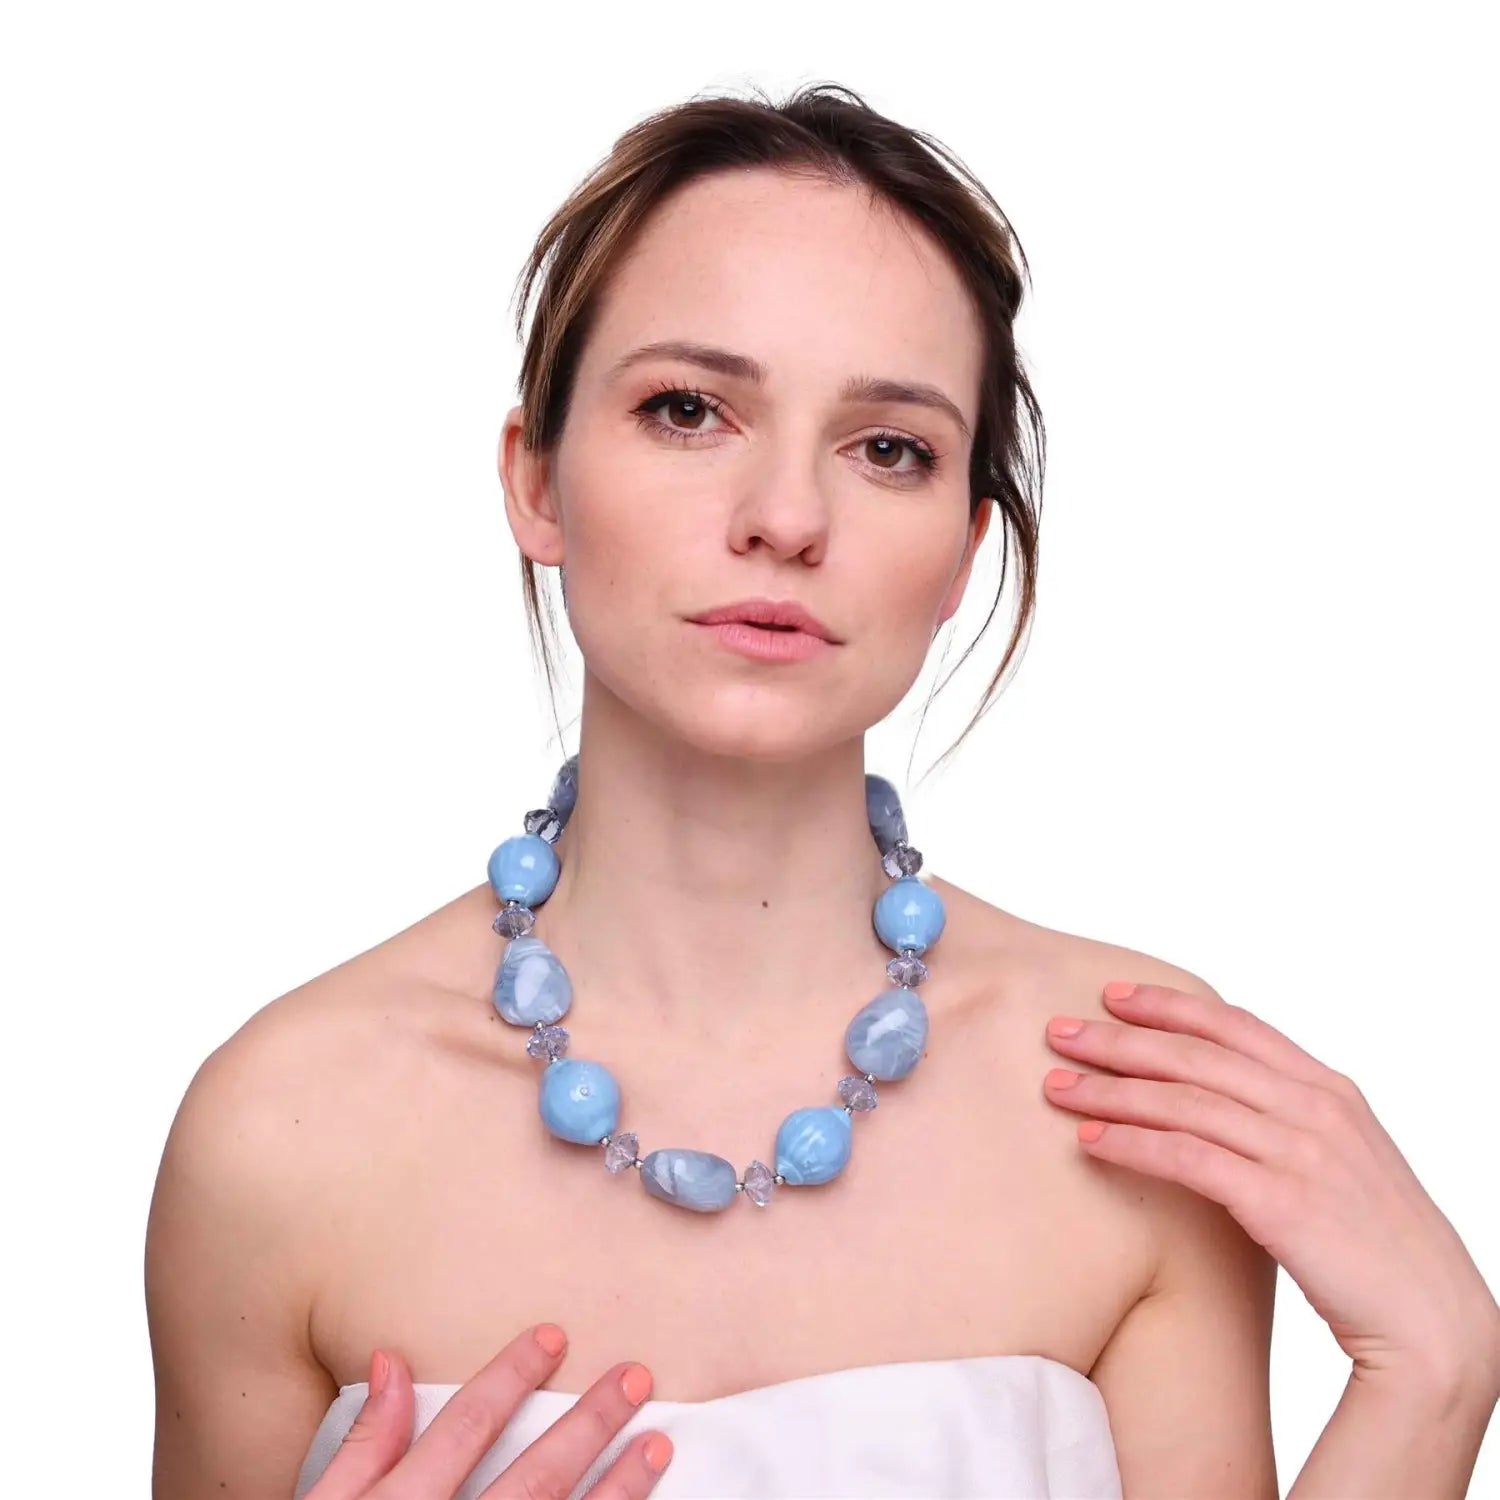 Woman in white dress wearing Chunky Beads Statement Necklace from Pastel Colour Collection.